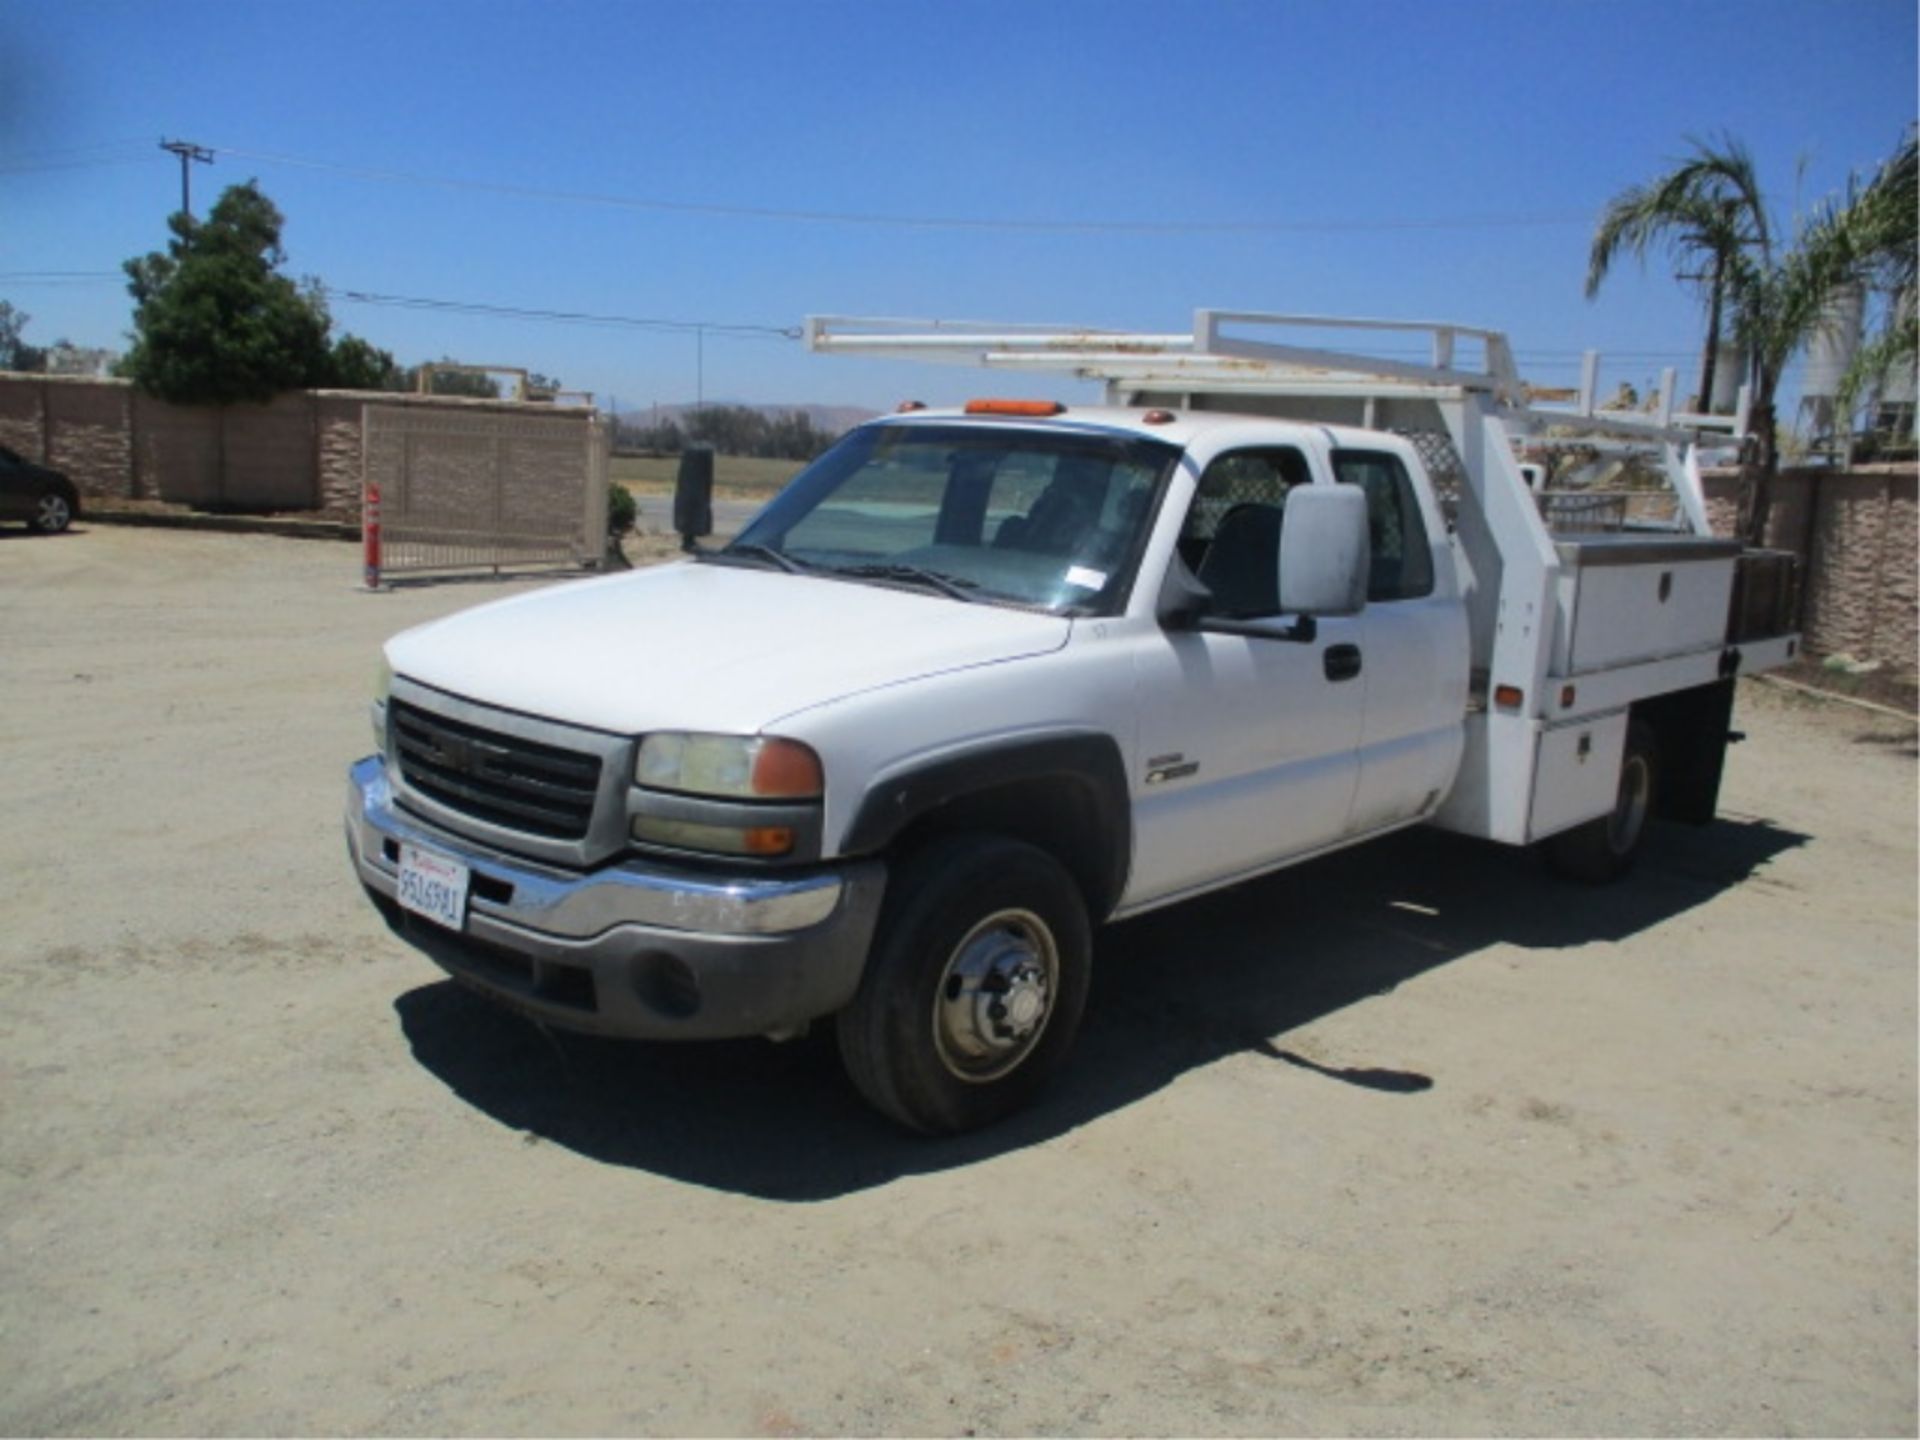 2006 Chevrolet 3500 Extended-Cab Utility Truck, 6.6L Turbo Diesel, Automatic, Tool Boxes, Lumber - Image 5 of 71